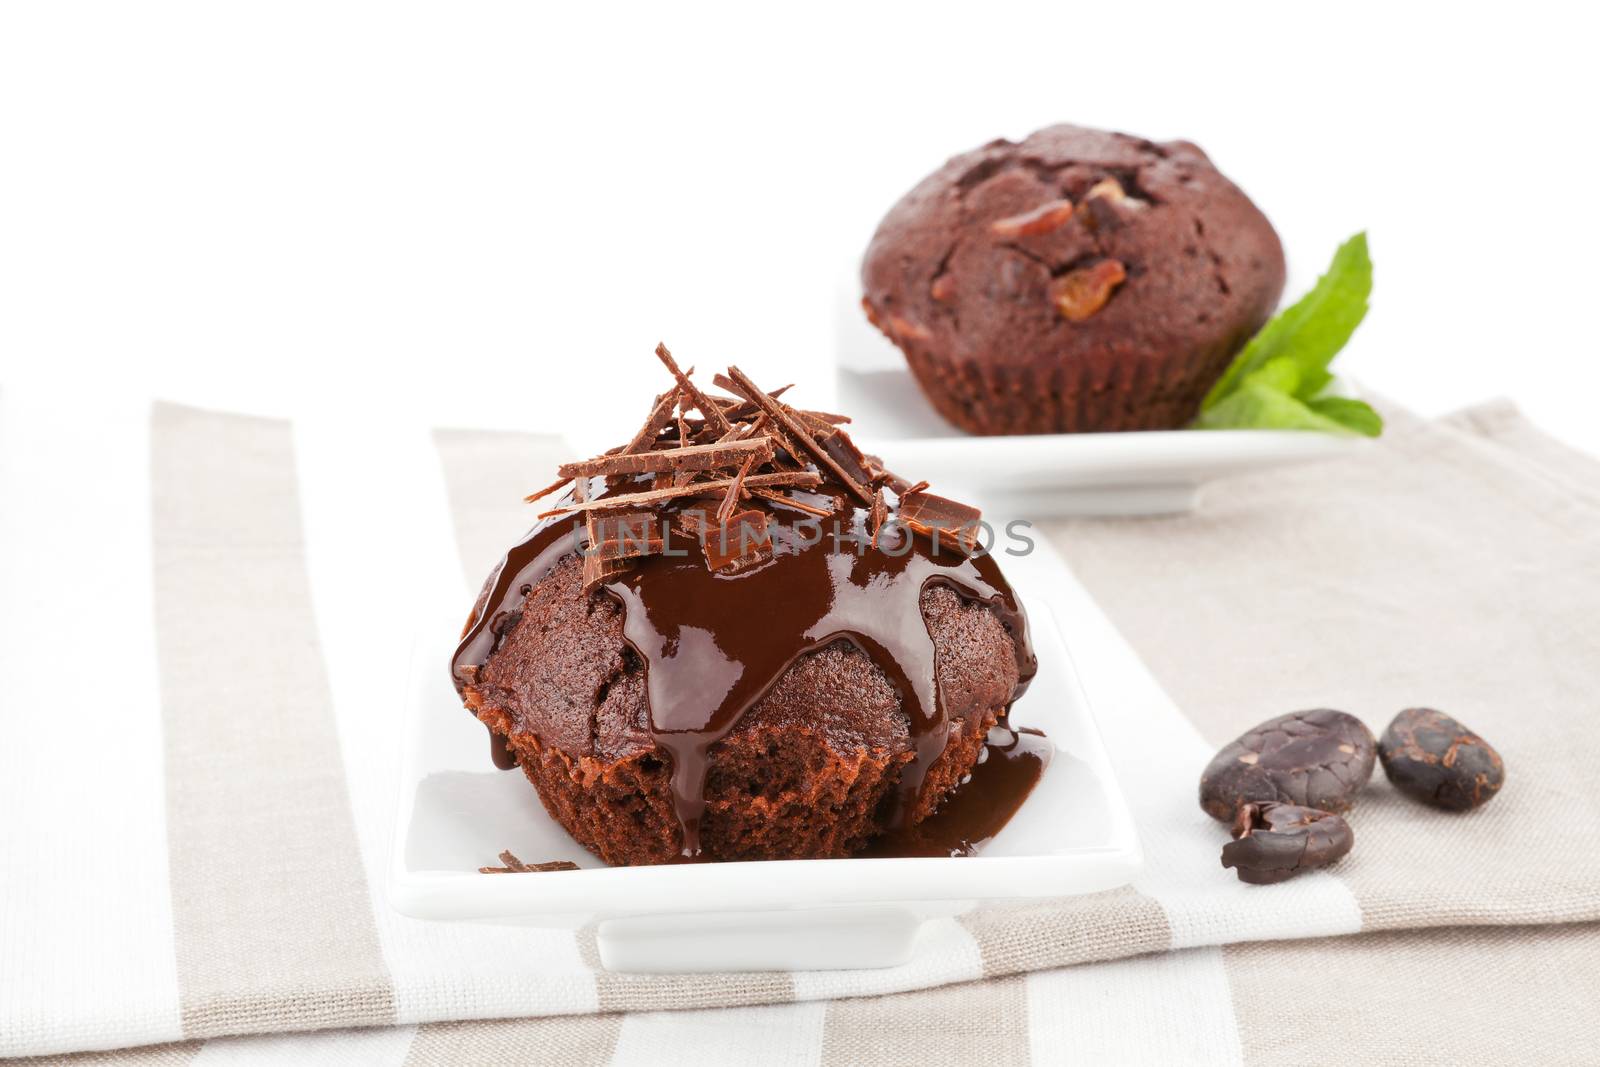 Delicious chocolate muffins with chocolate garnish and chocolate beans on kitchen cloth. Gourmet sweet food.